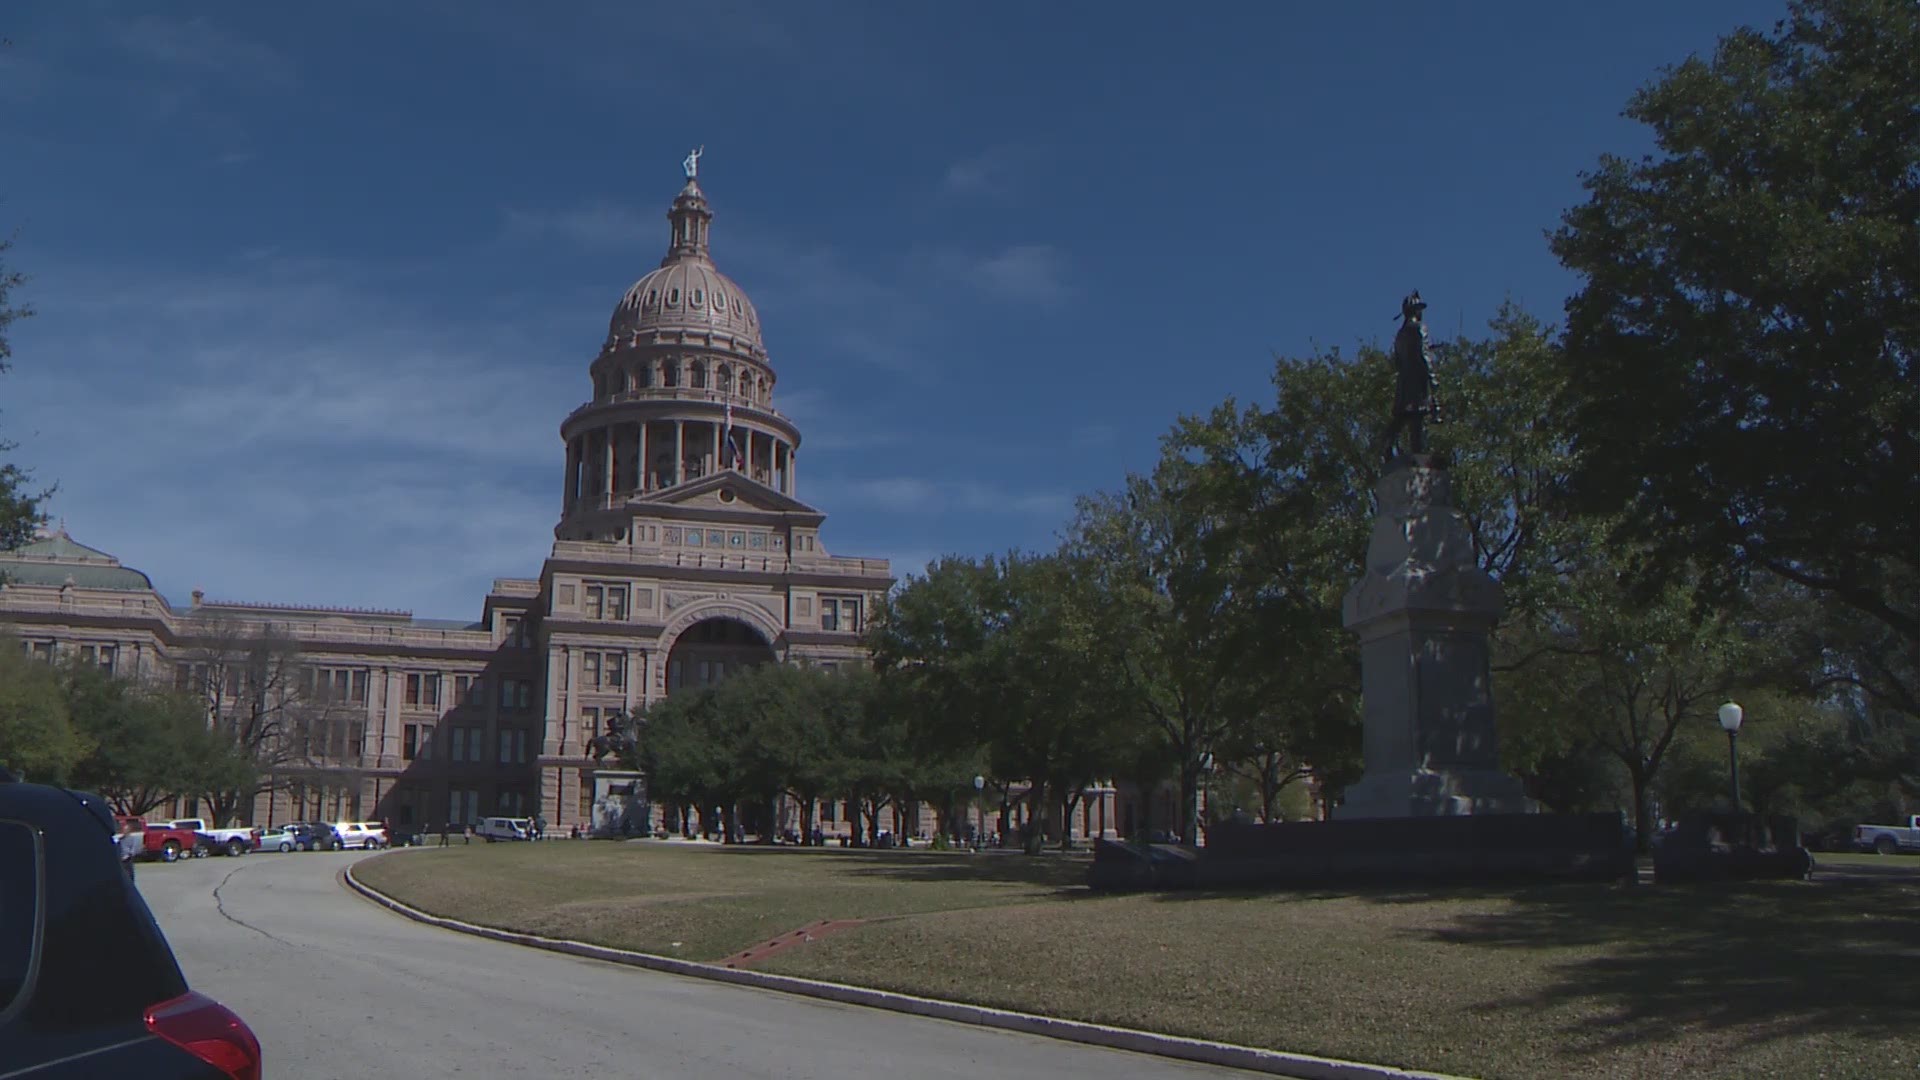 Empower Texans' CEO Michael Quinn Sullivan released the hour-long recording on Tuesday.